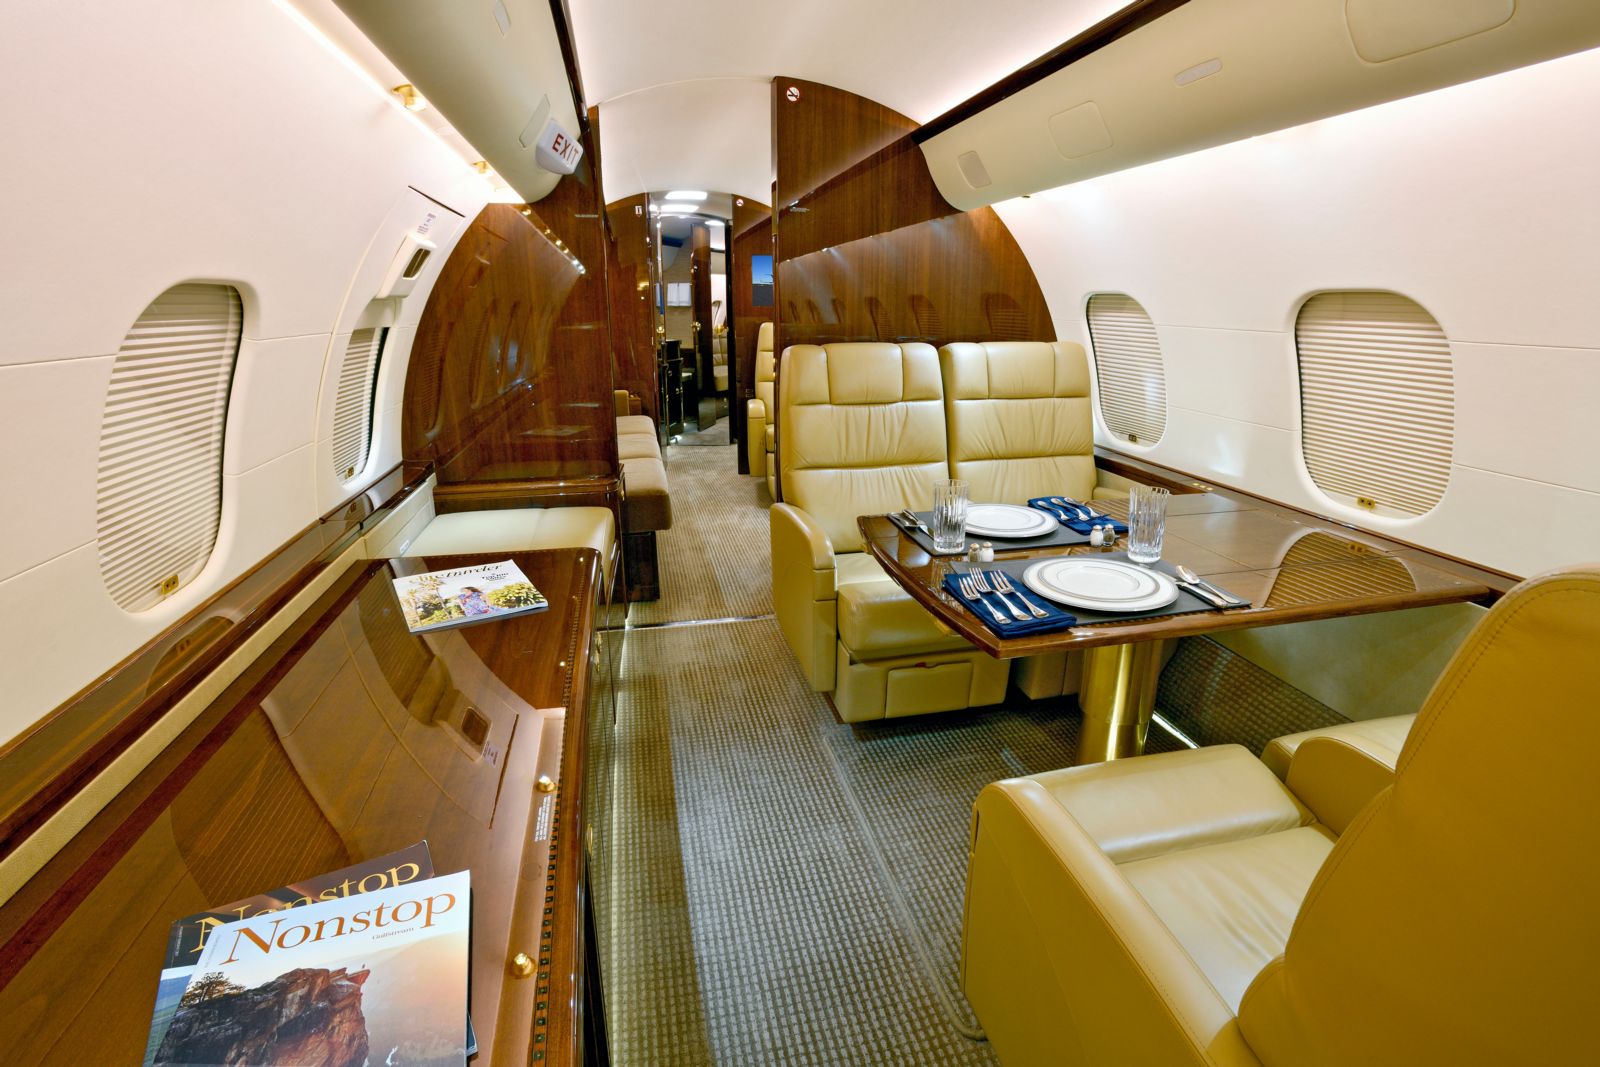 Bombardier Global 5000  S/N 9366 for sale | gallery image: /userfiles/images/G5000_sn9366/mid%20aft.jpg